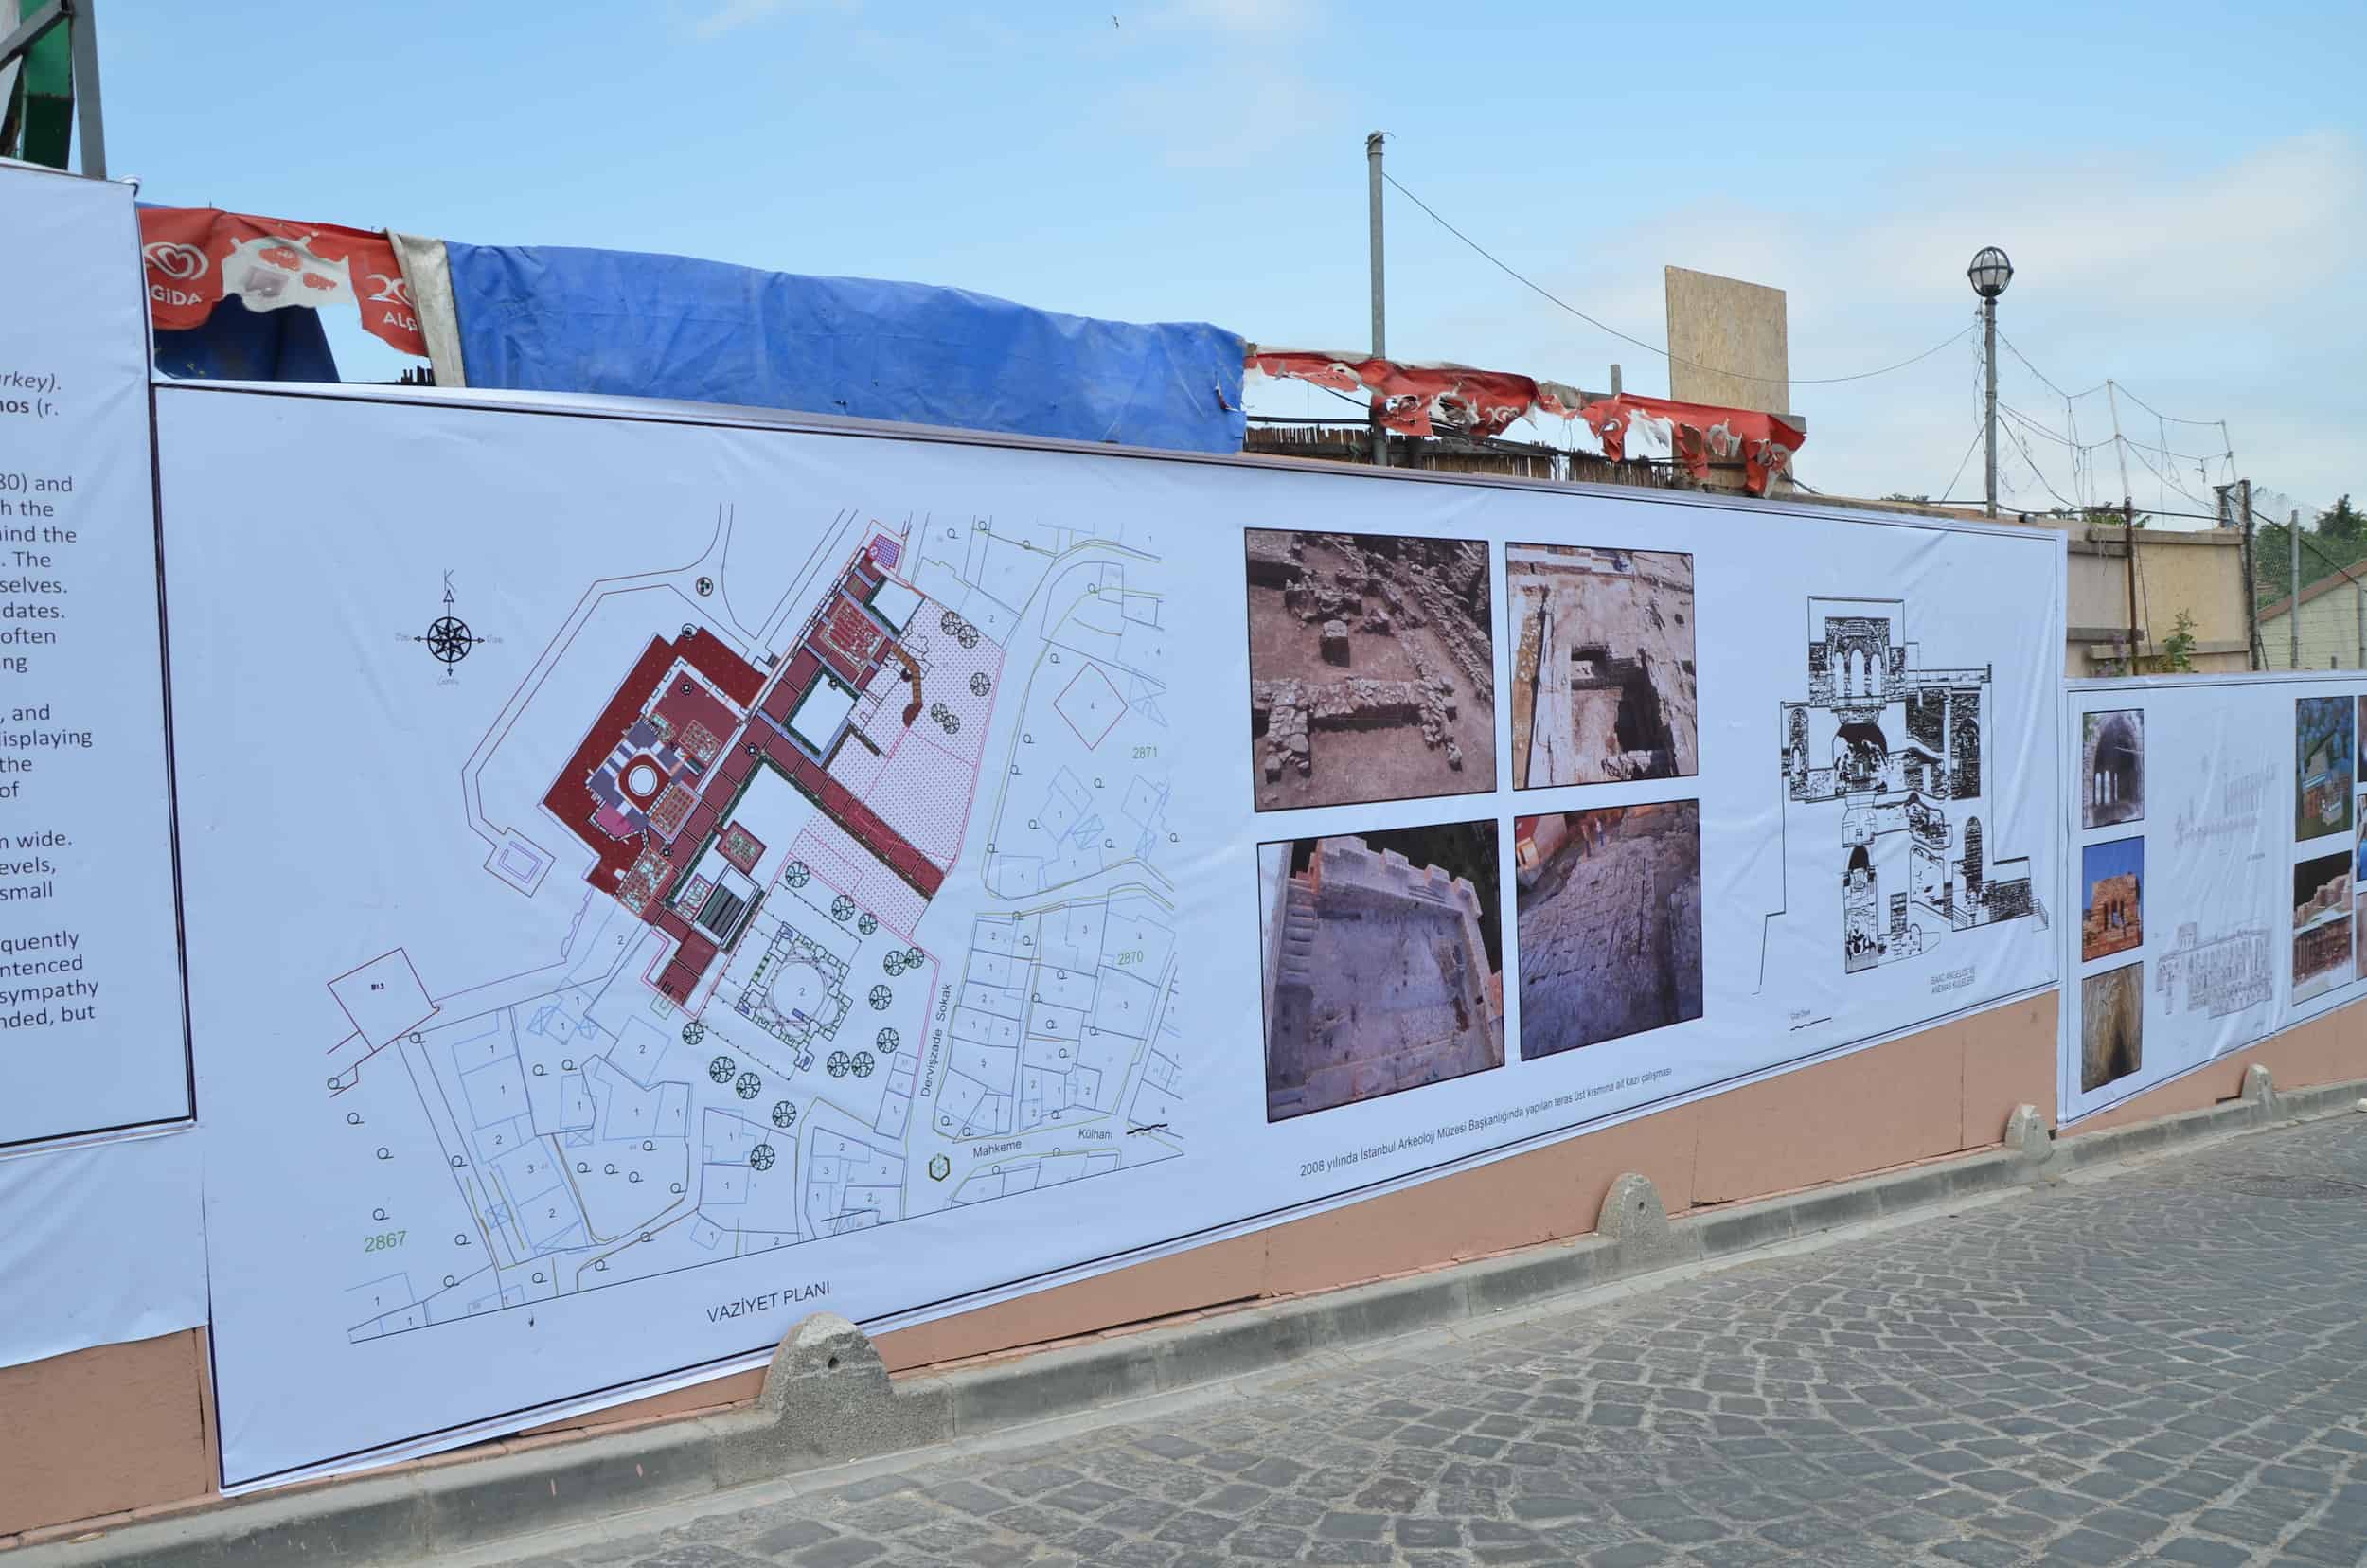 Photos and plan of the project at the Prison of Anemas on the Walls of Blachernae